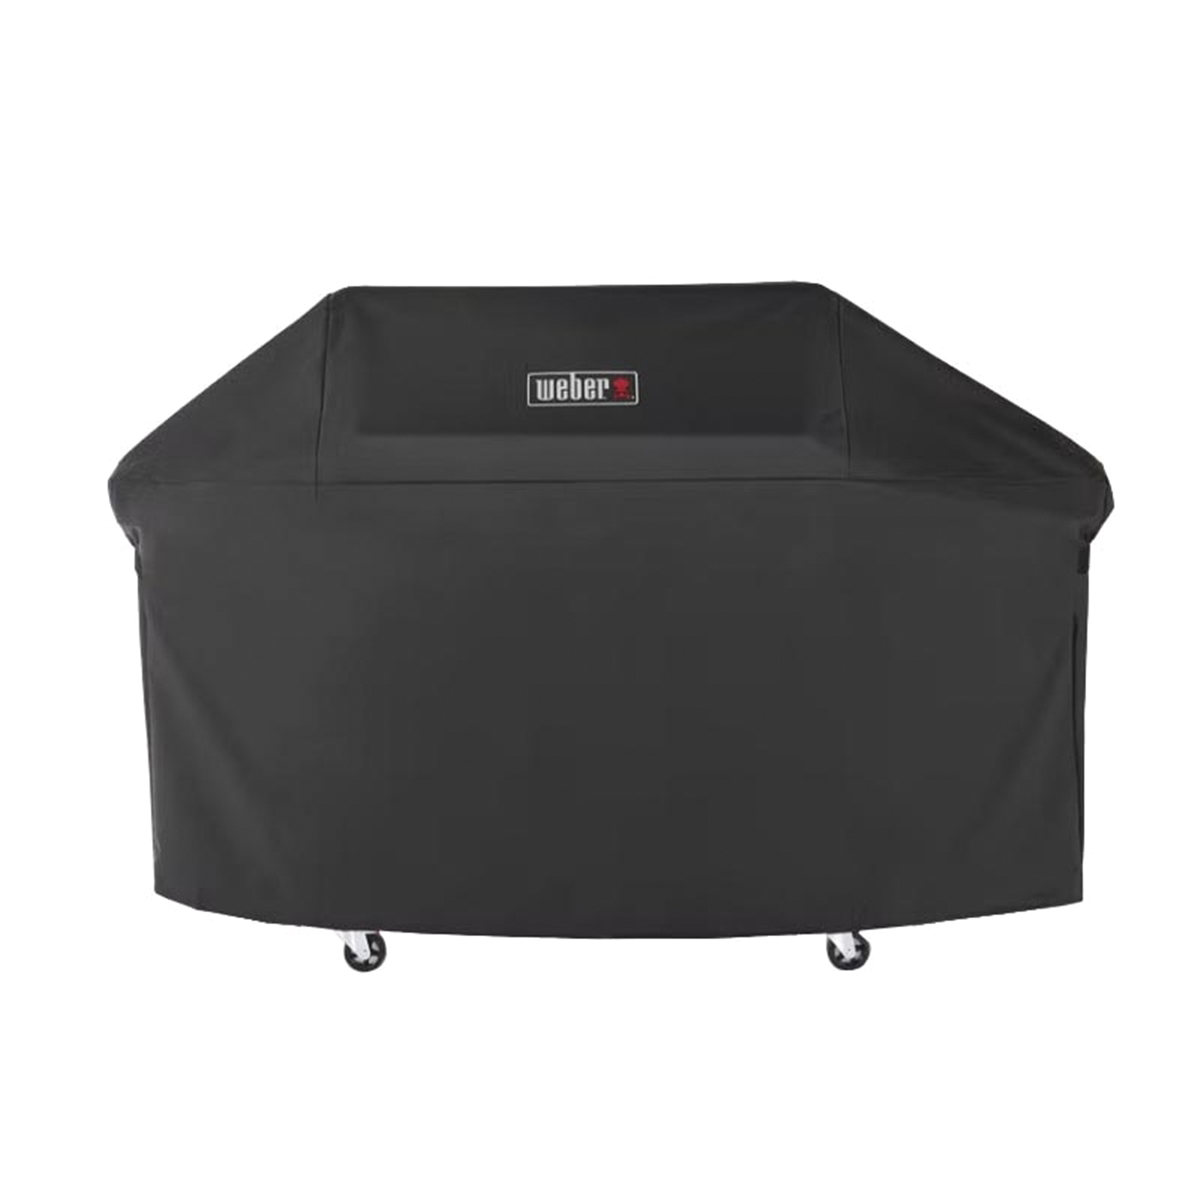 Weber 7757 Grill Cover, 63 in W, 25.6 in D, 43.4 in H, Polyester, Black